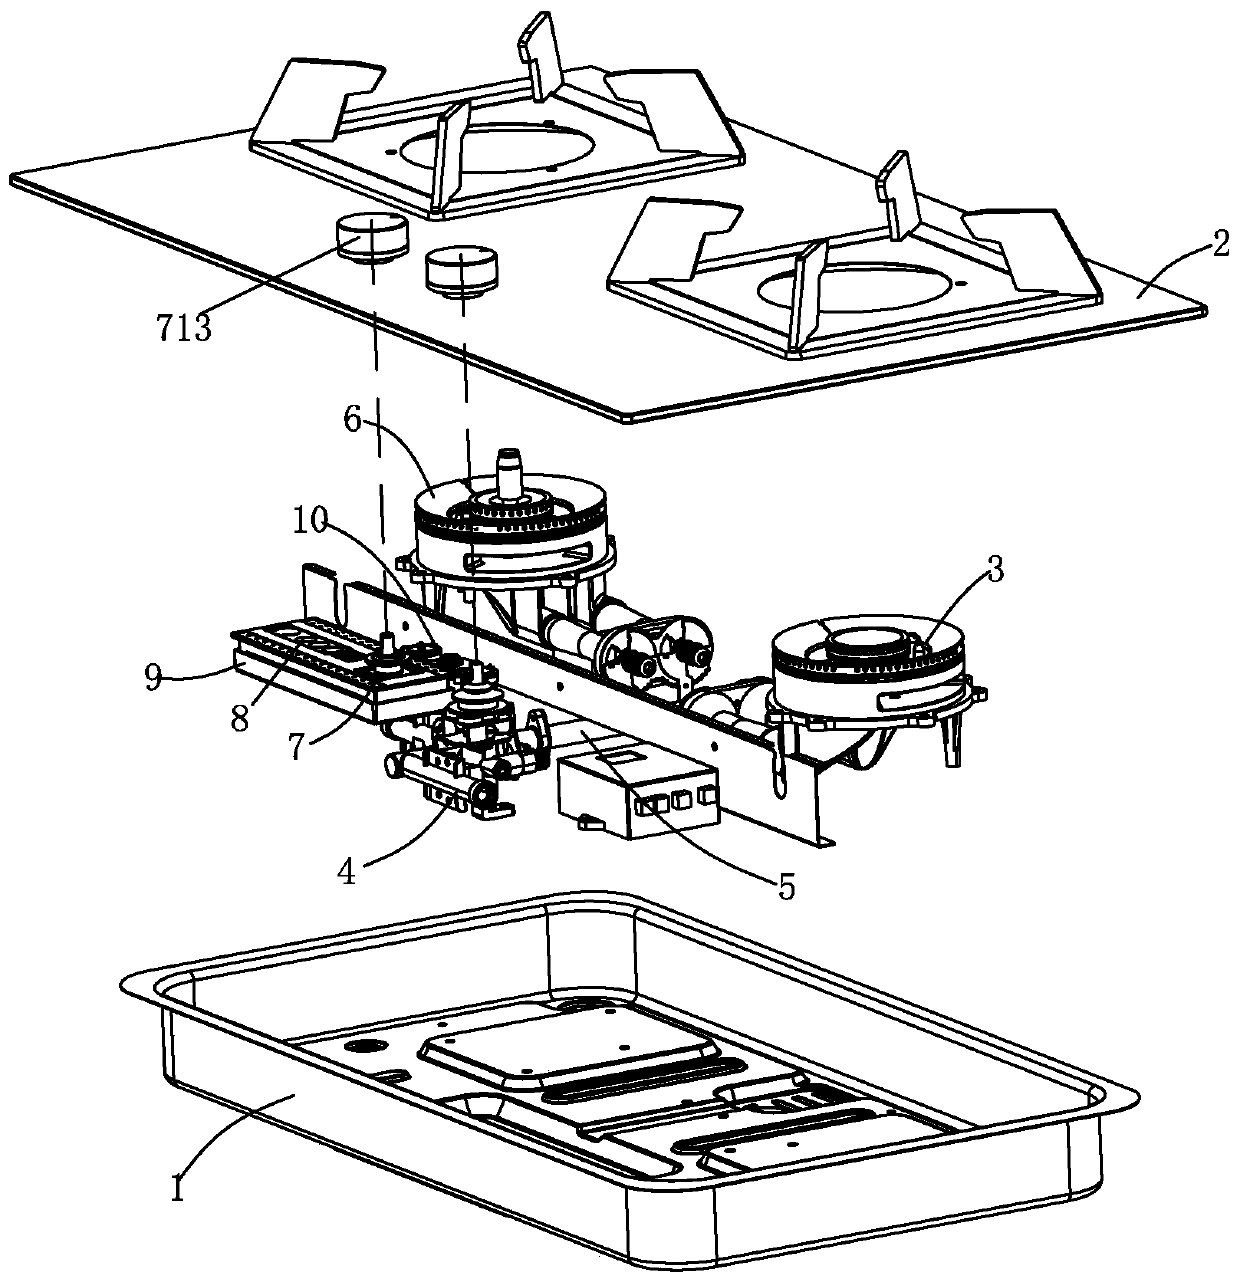 Double-mode control gas stove